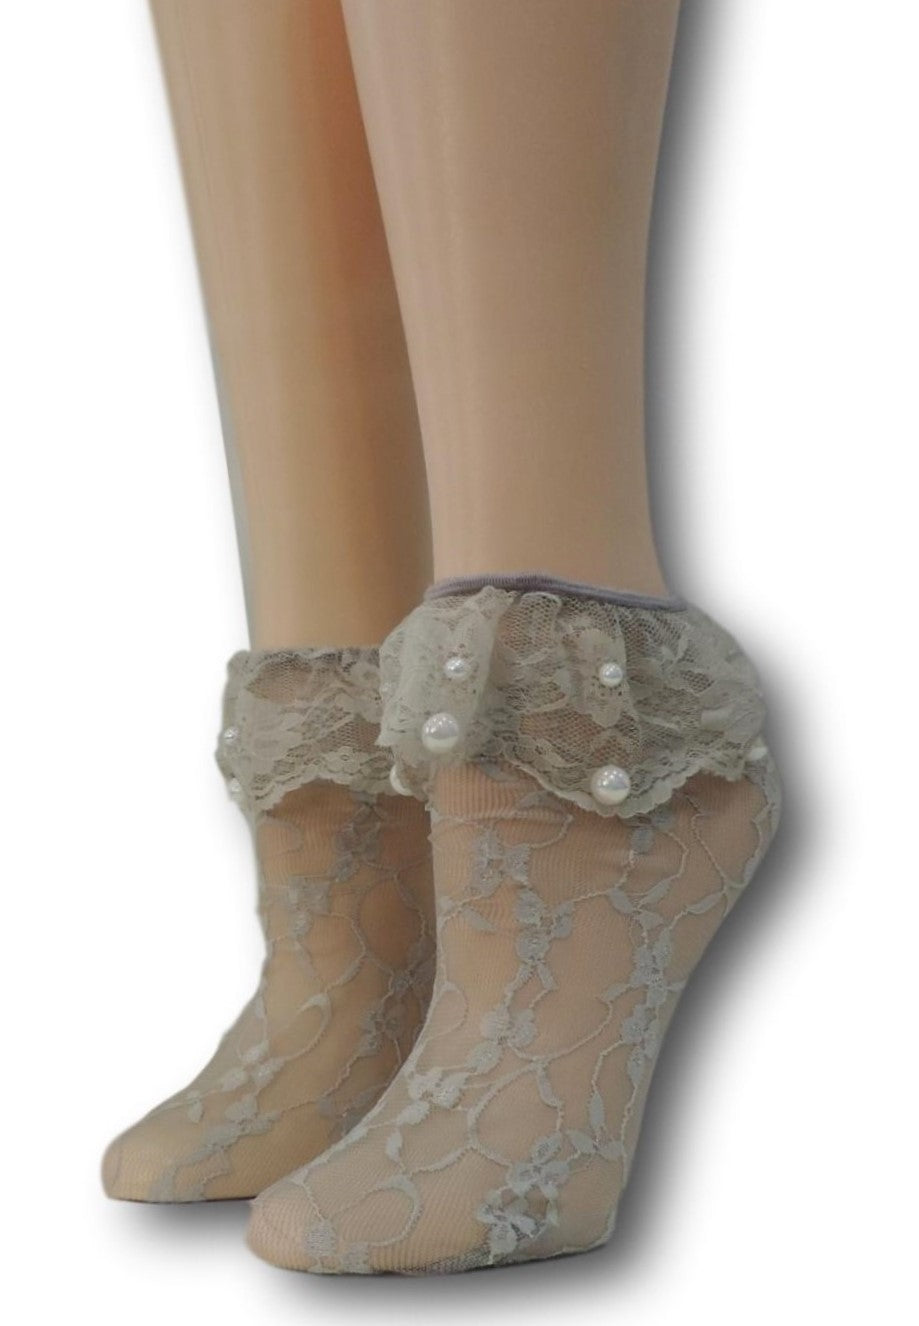 Steel Grey Mesh Socks with edging lace and beads